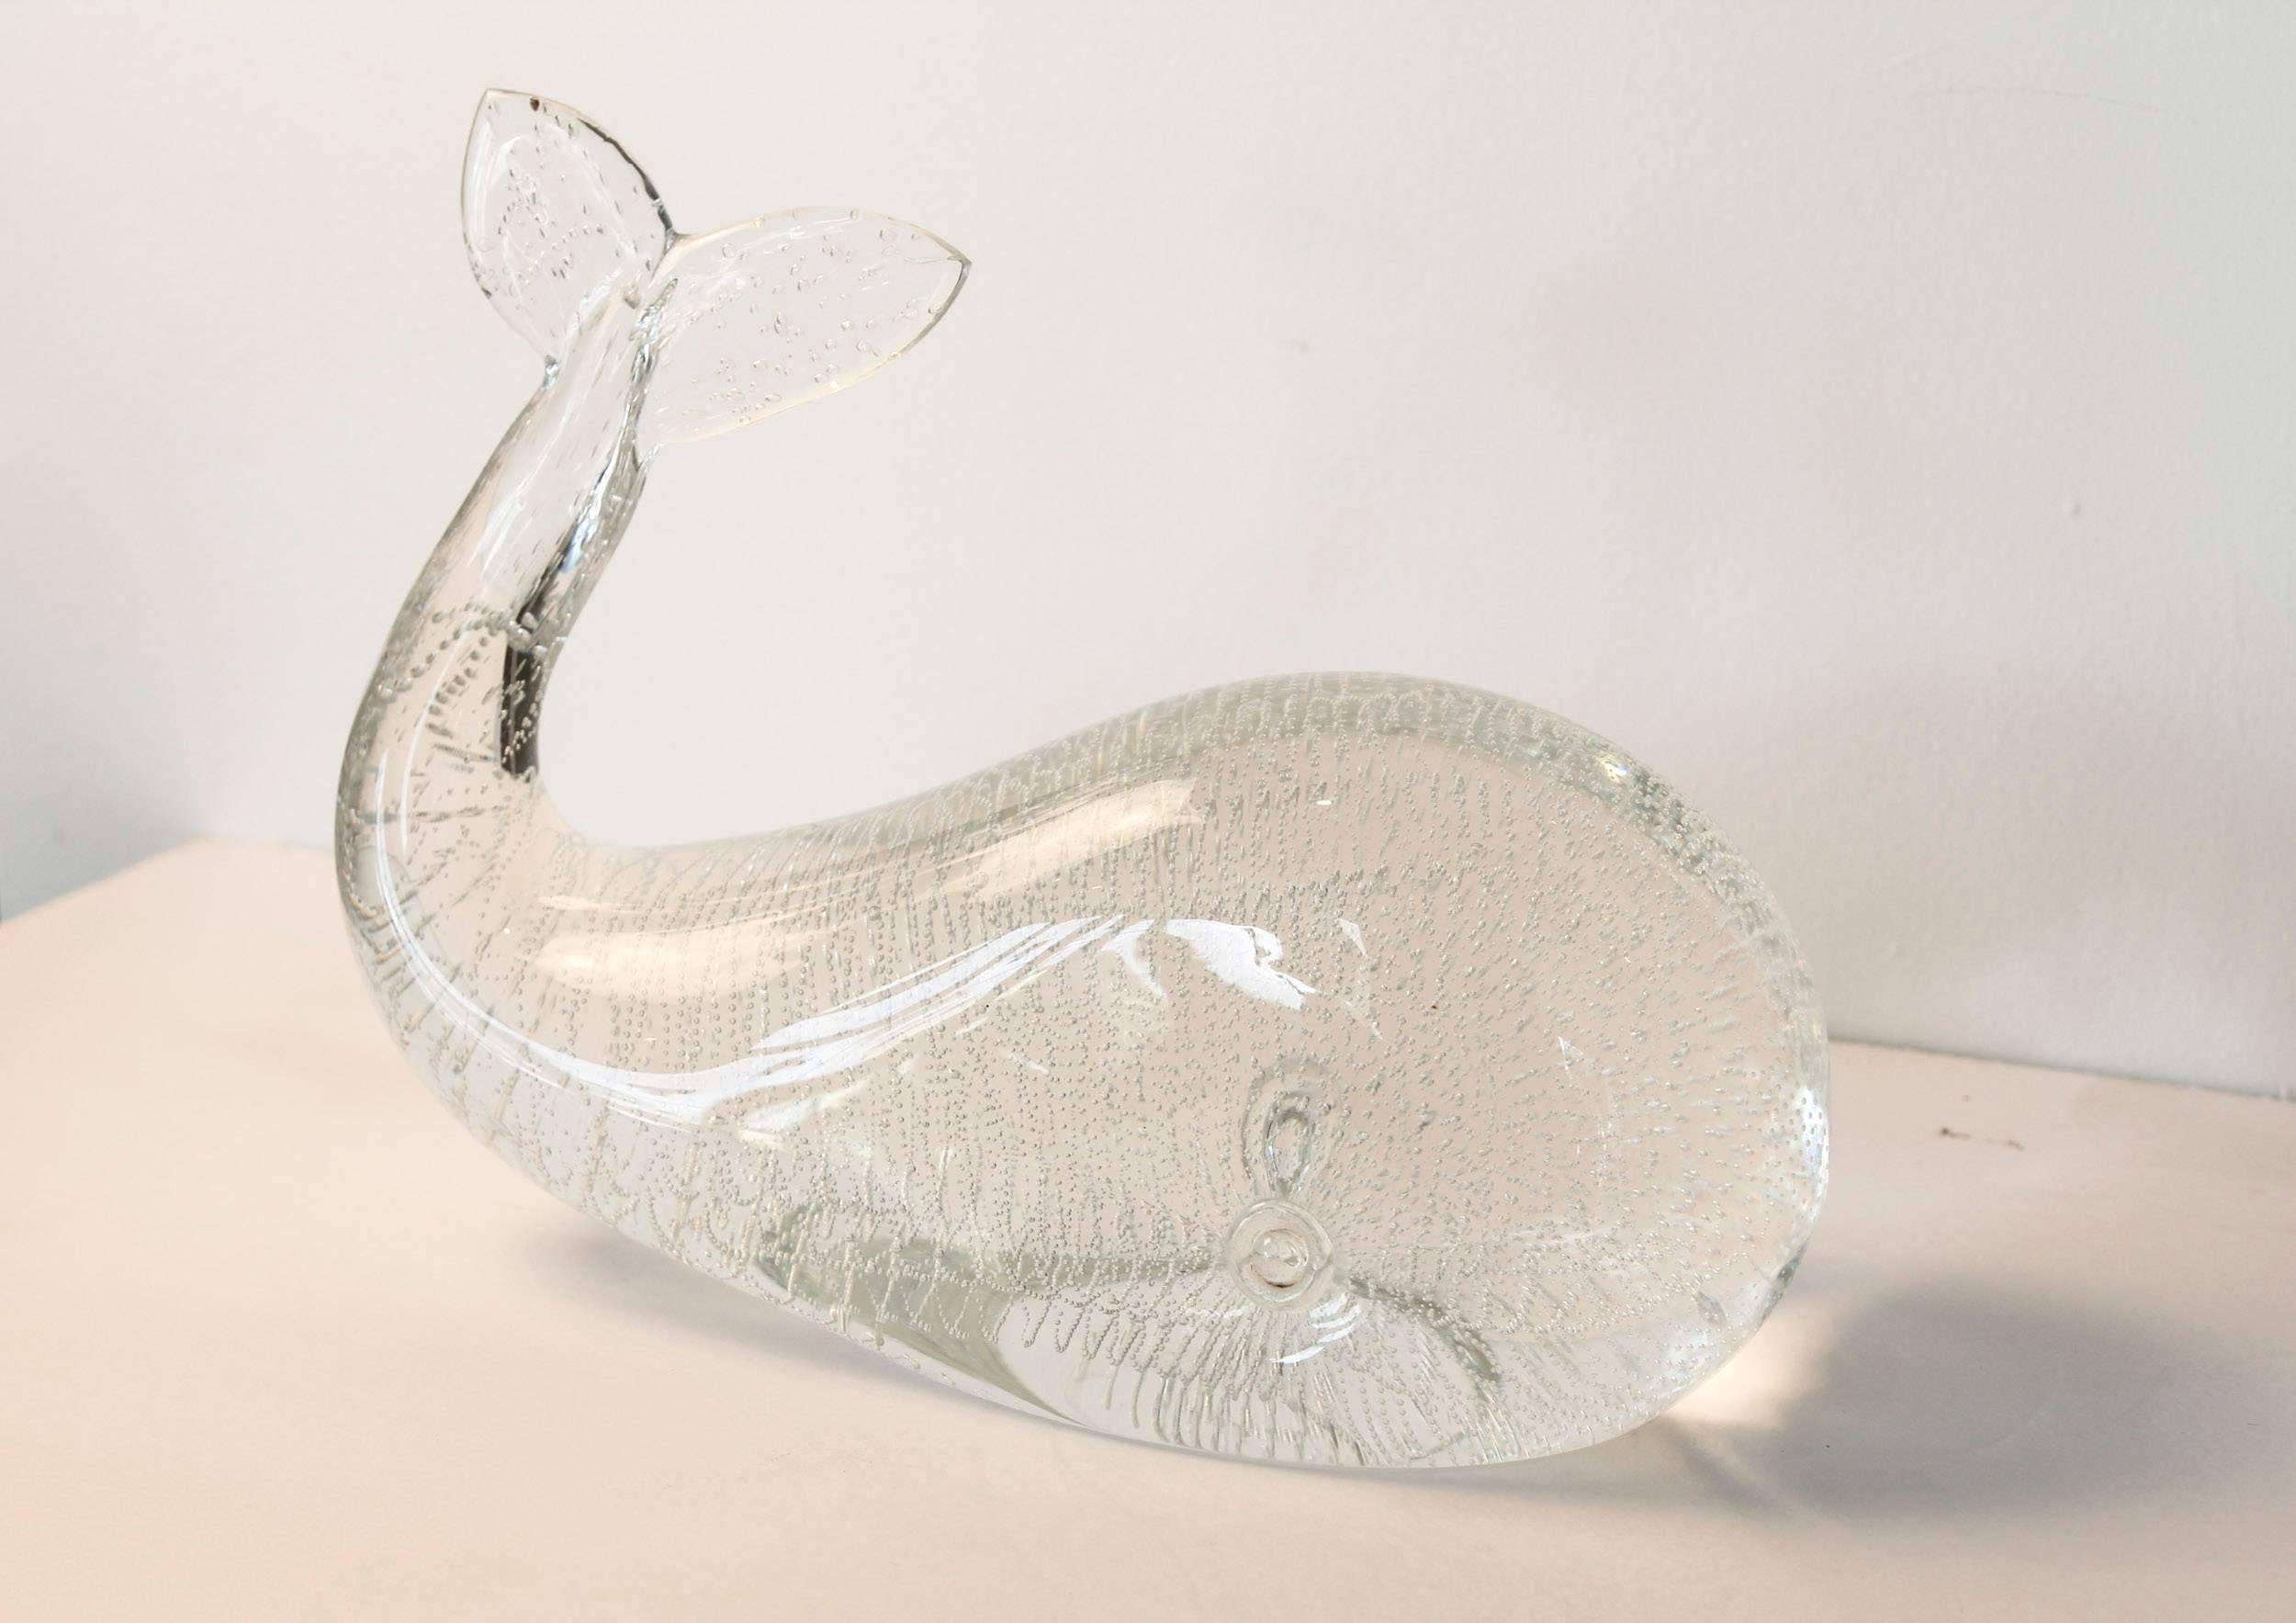 Charming Murano glass whale by Licio Zanetti with internal controlled bubbles. Perfect for holiday gift giving.